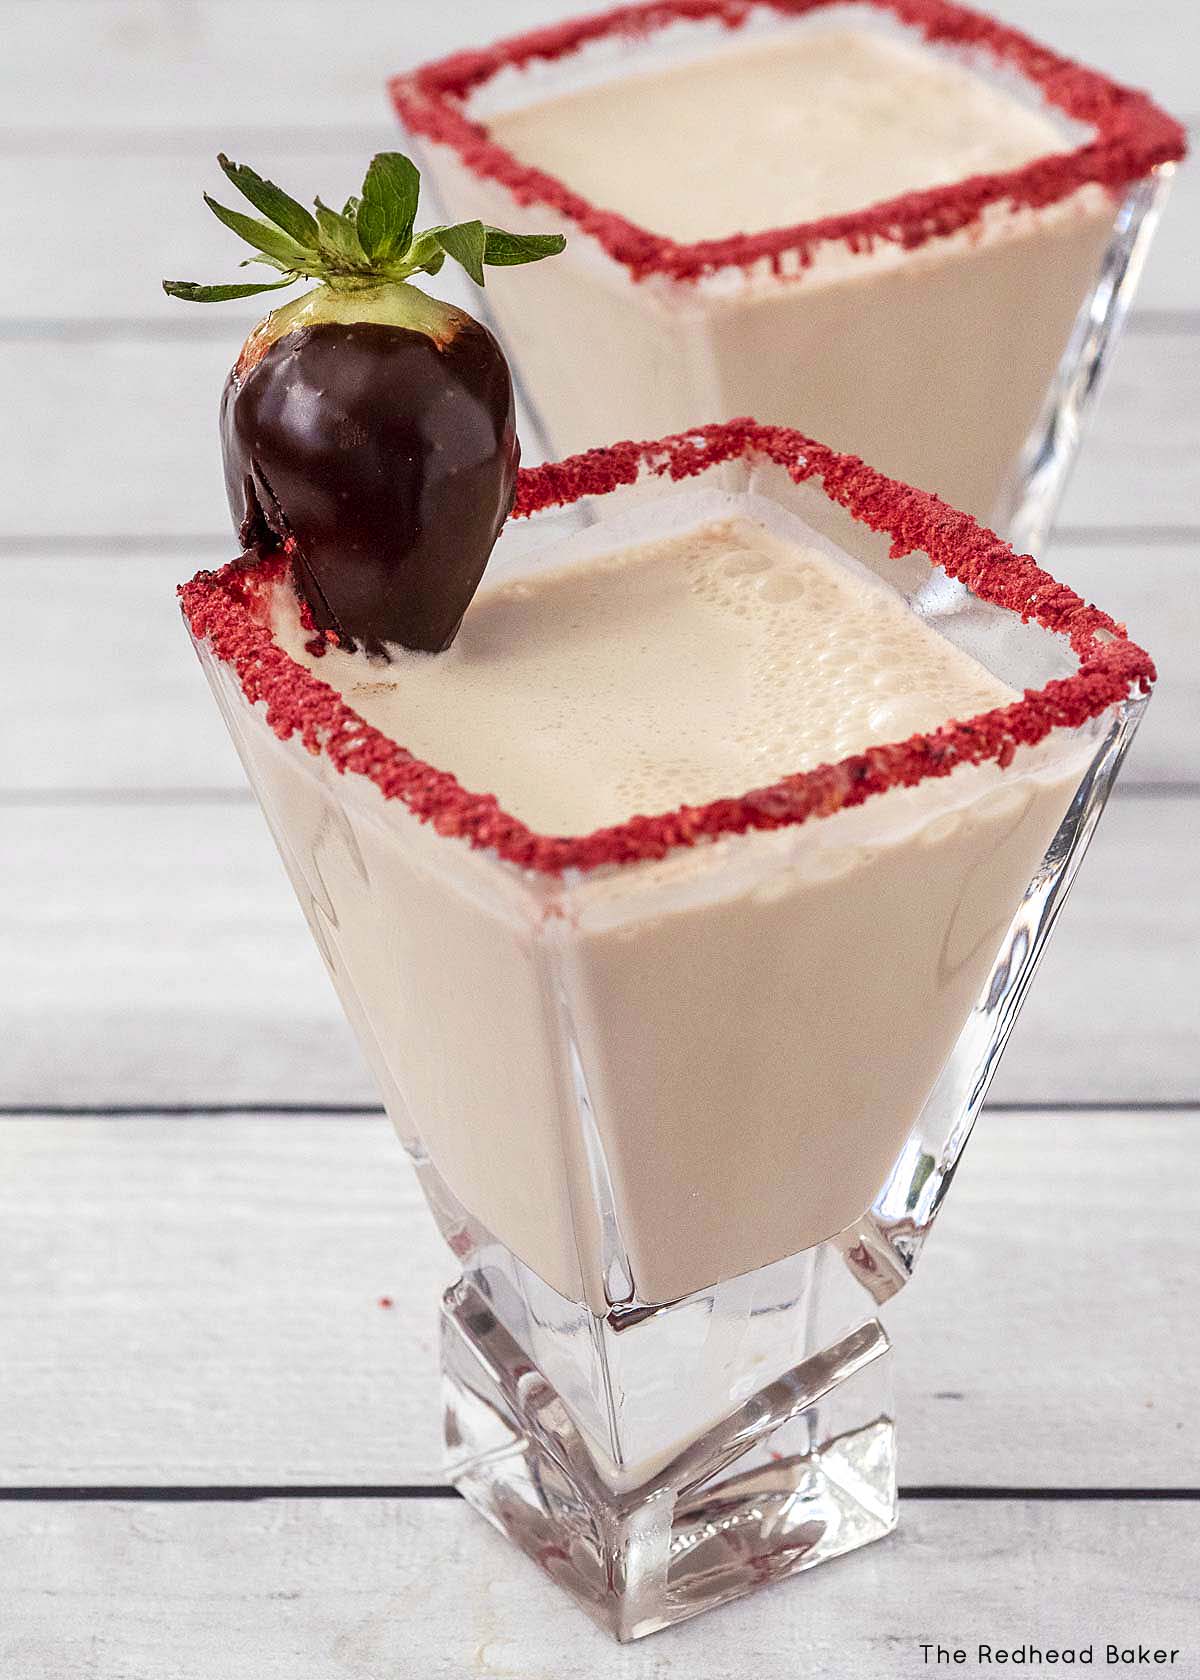 Two chocolate-covered strawberry martinis.